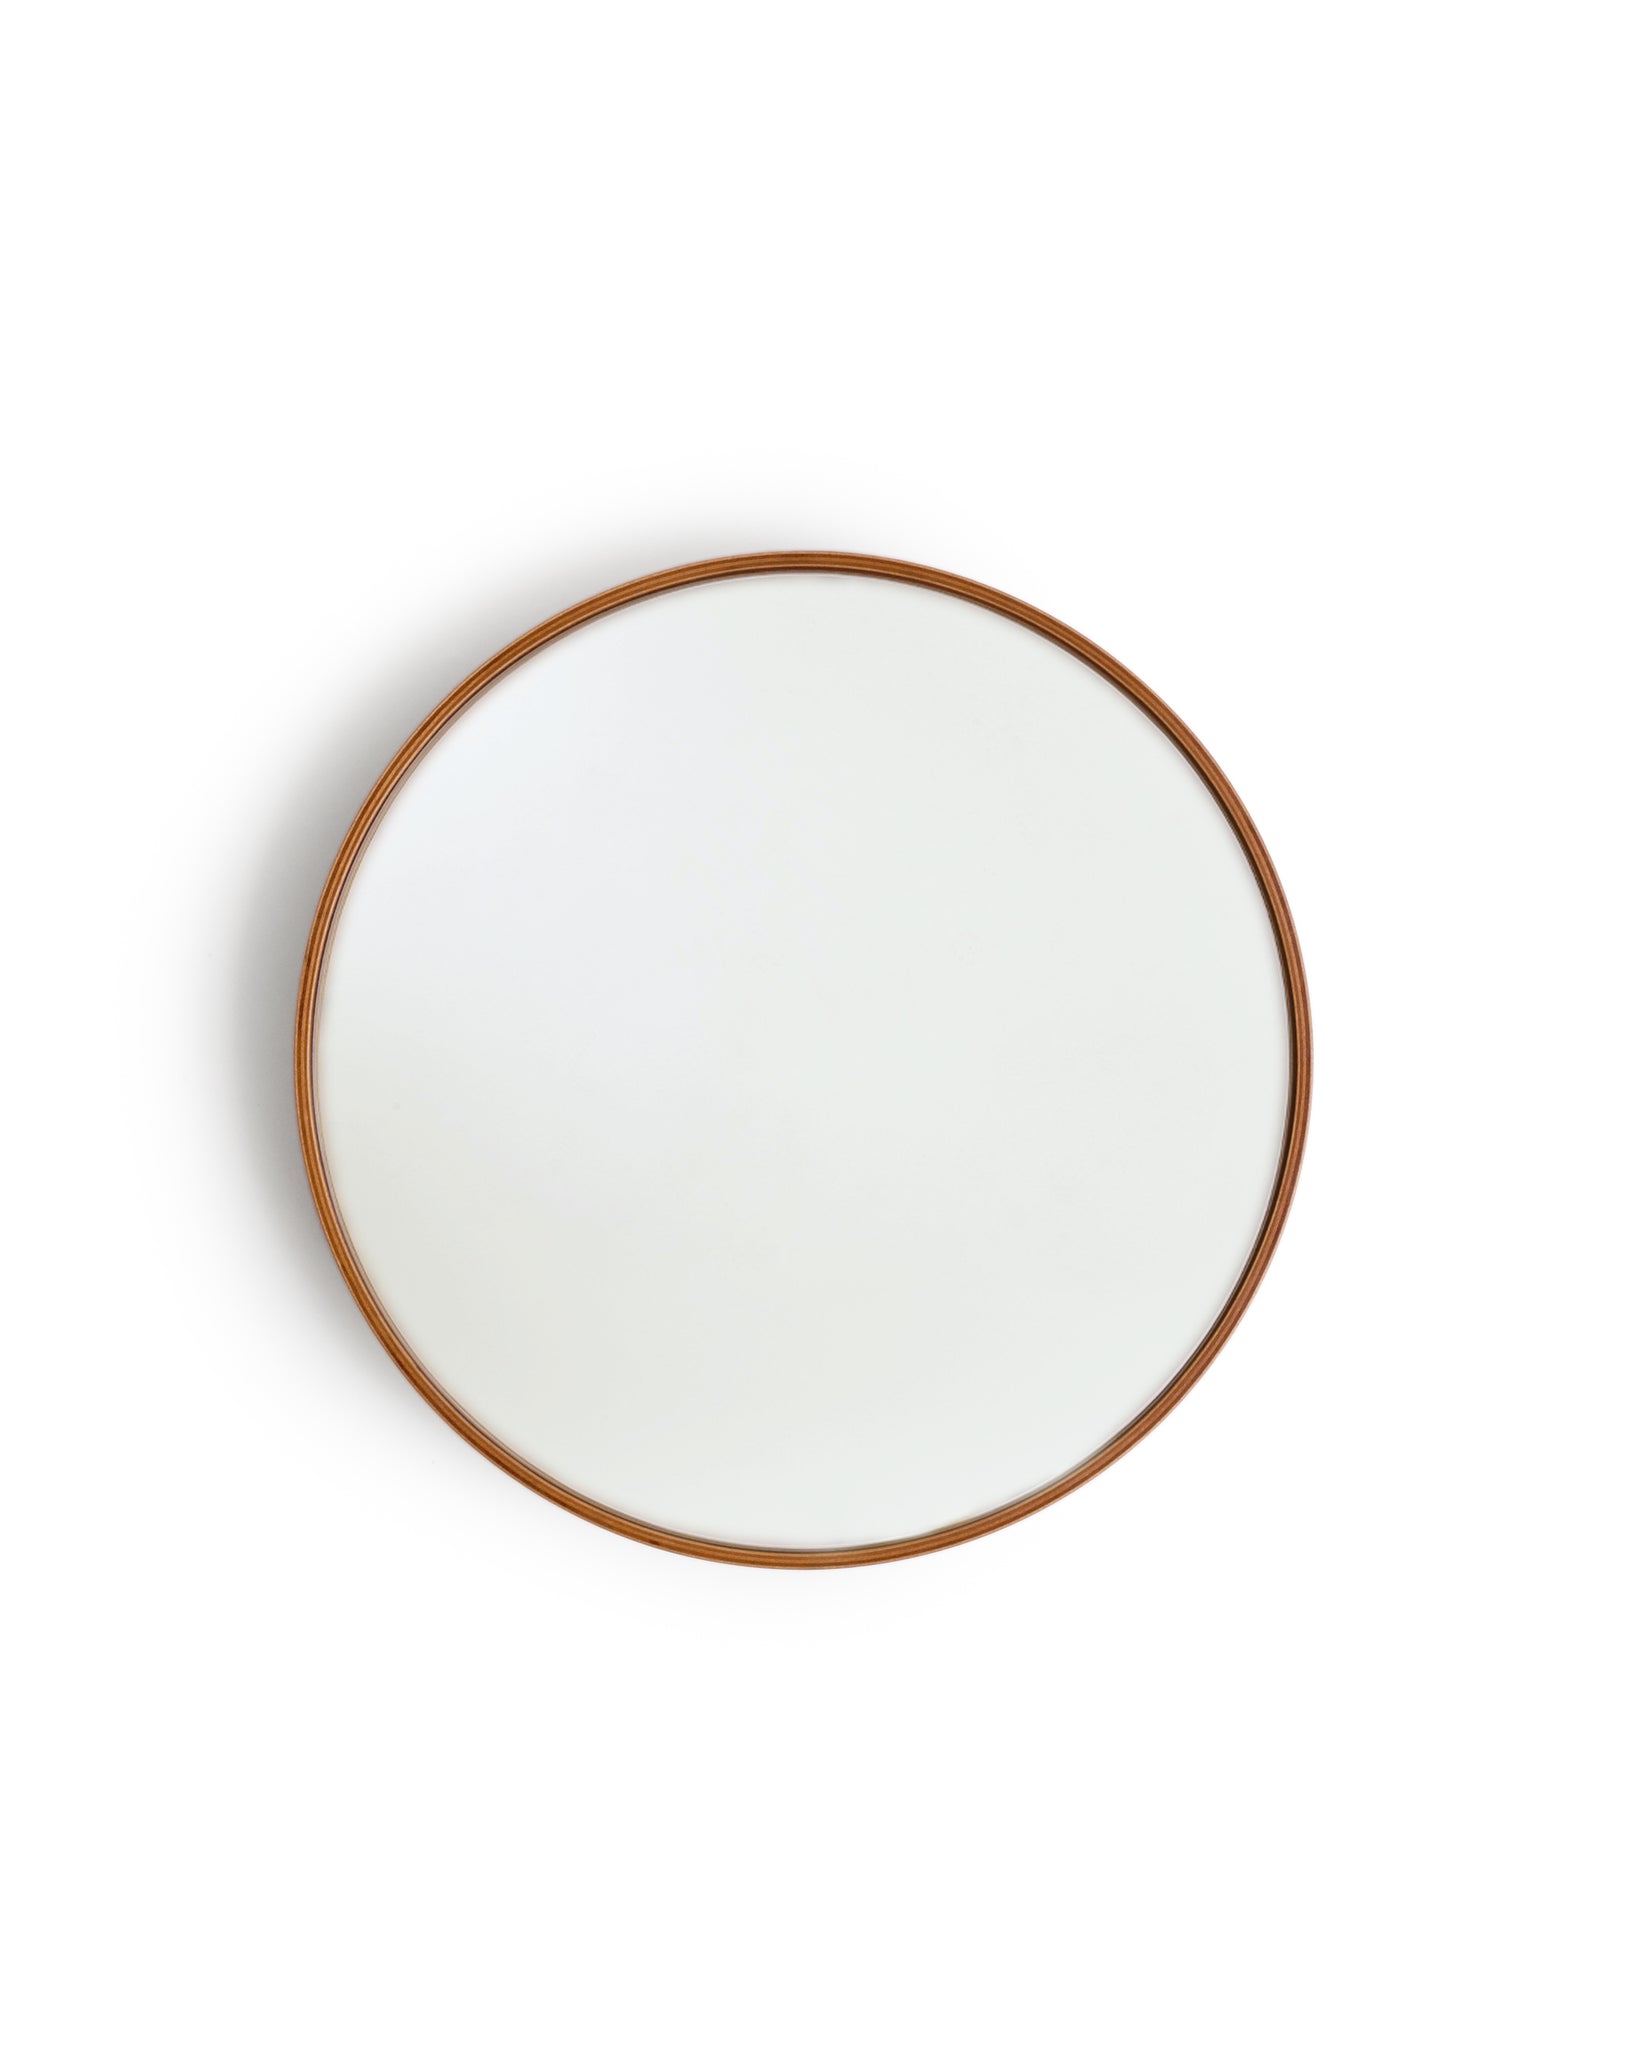 Ayous wood mirror silhouetted against white background